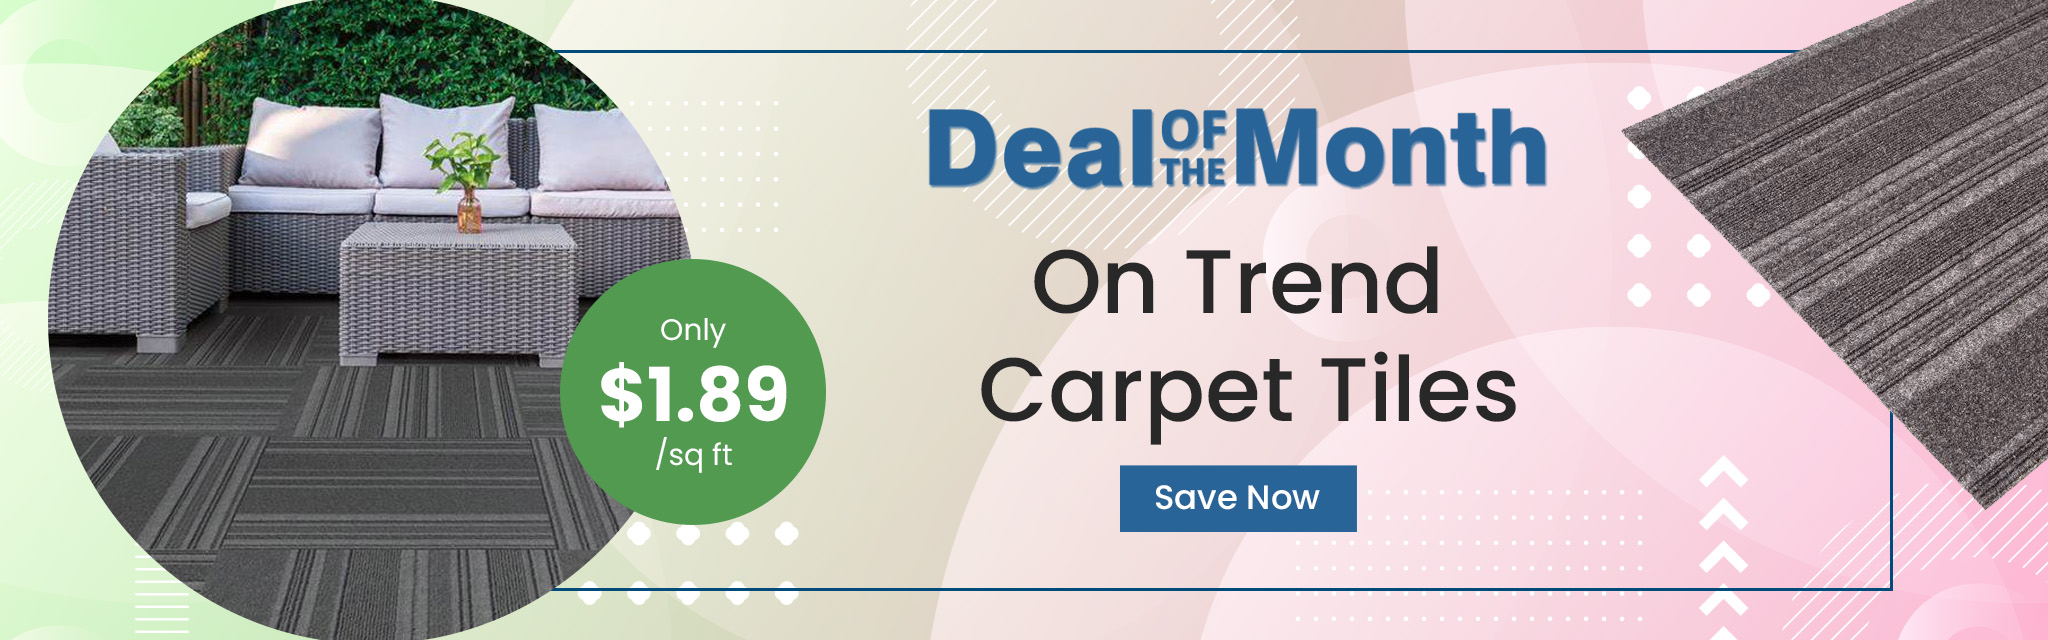 Deal Of The Month. On Trend Carpet Tiles. Only $1.89 per square feet. Save Now